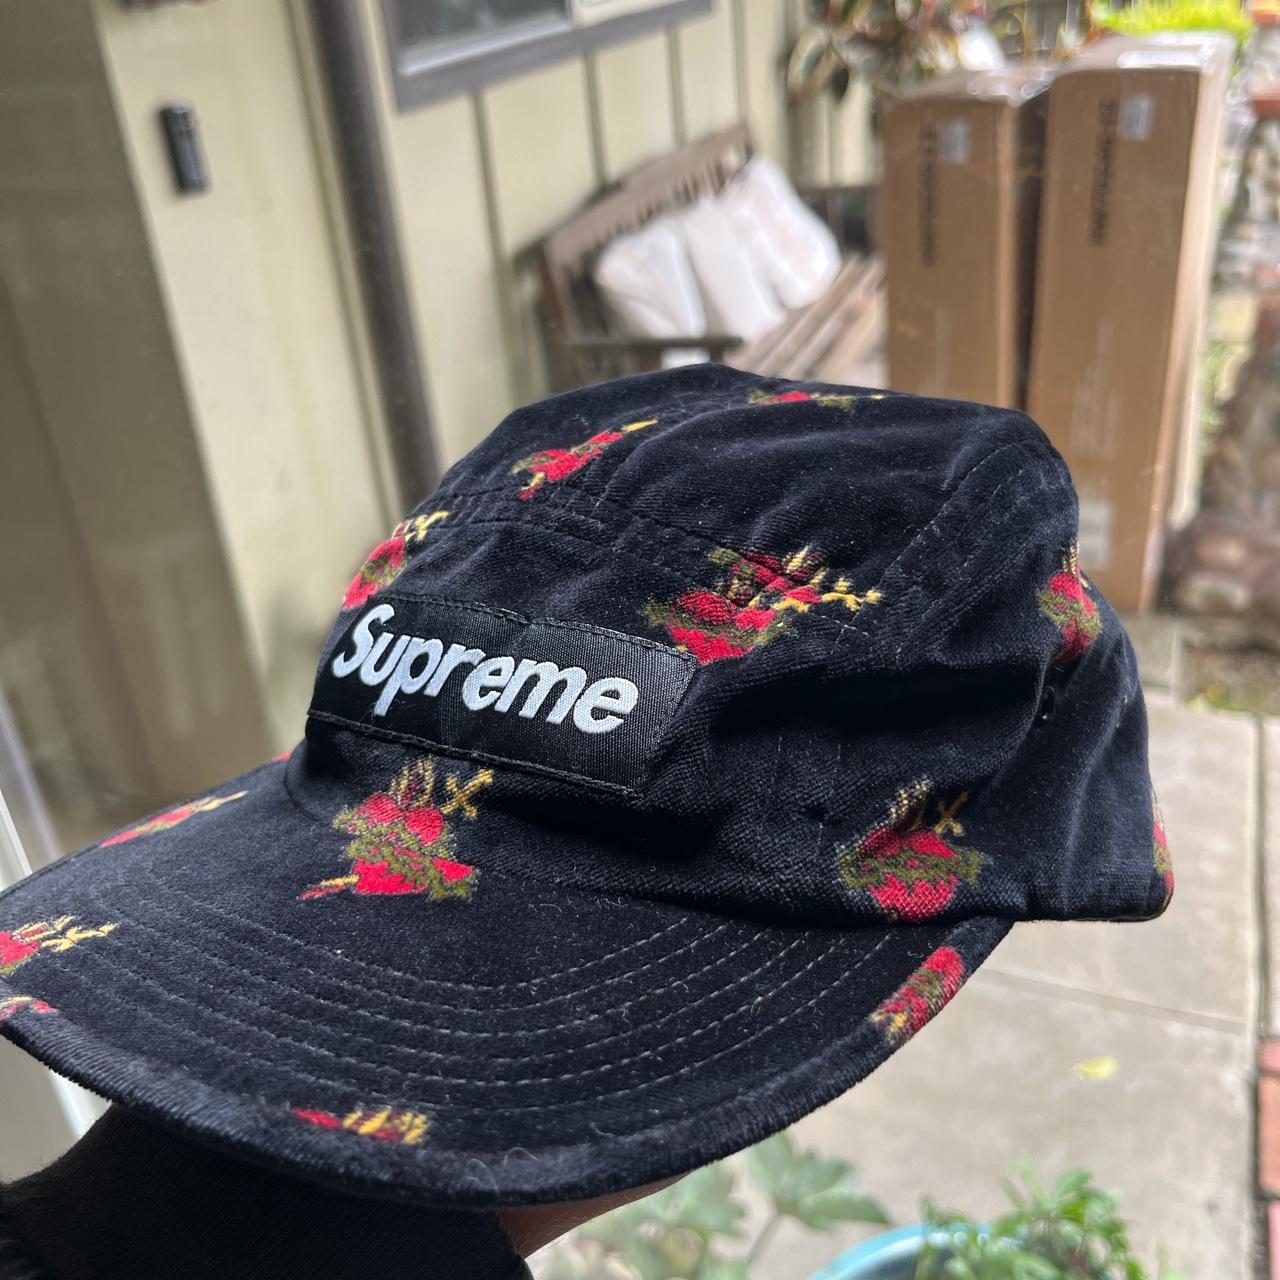 Supreme Sacred Hearts Camp Cap for Sale in San Clemente, CA - OfferUp